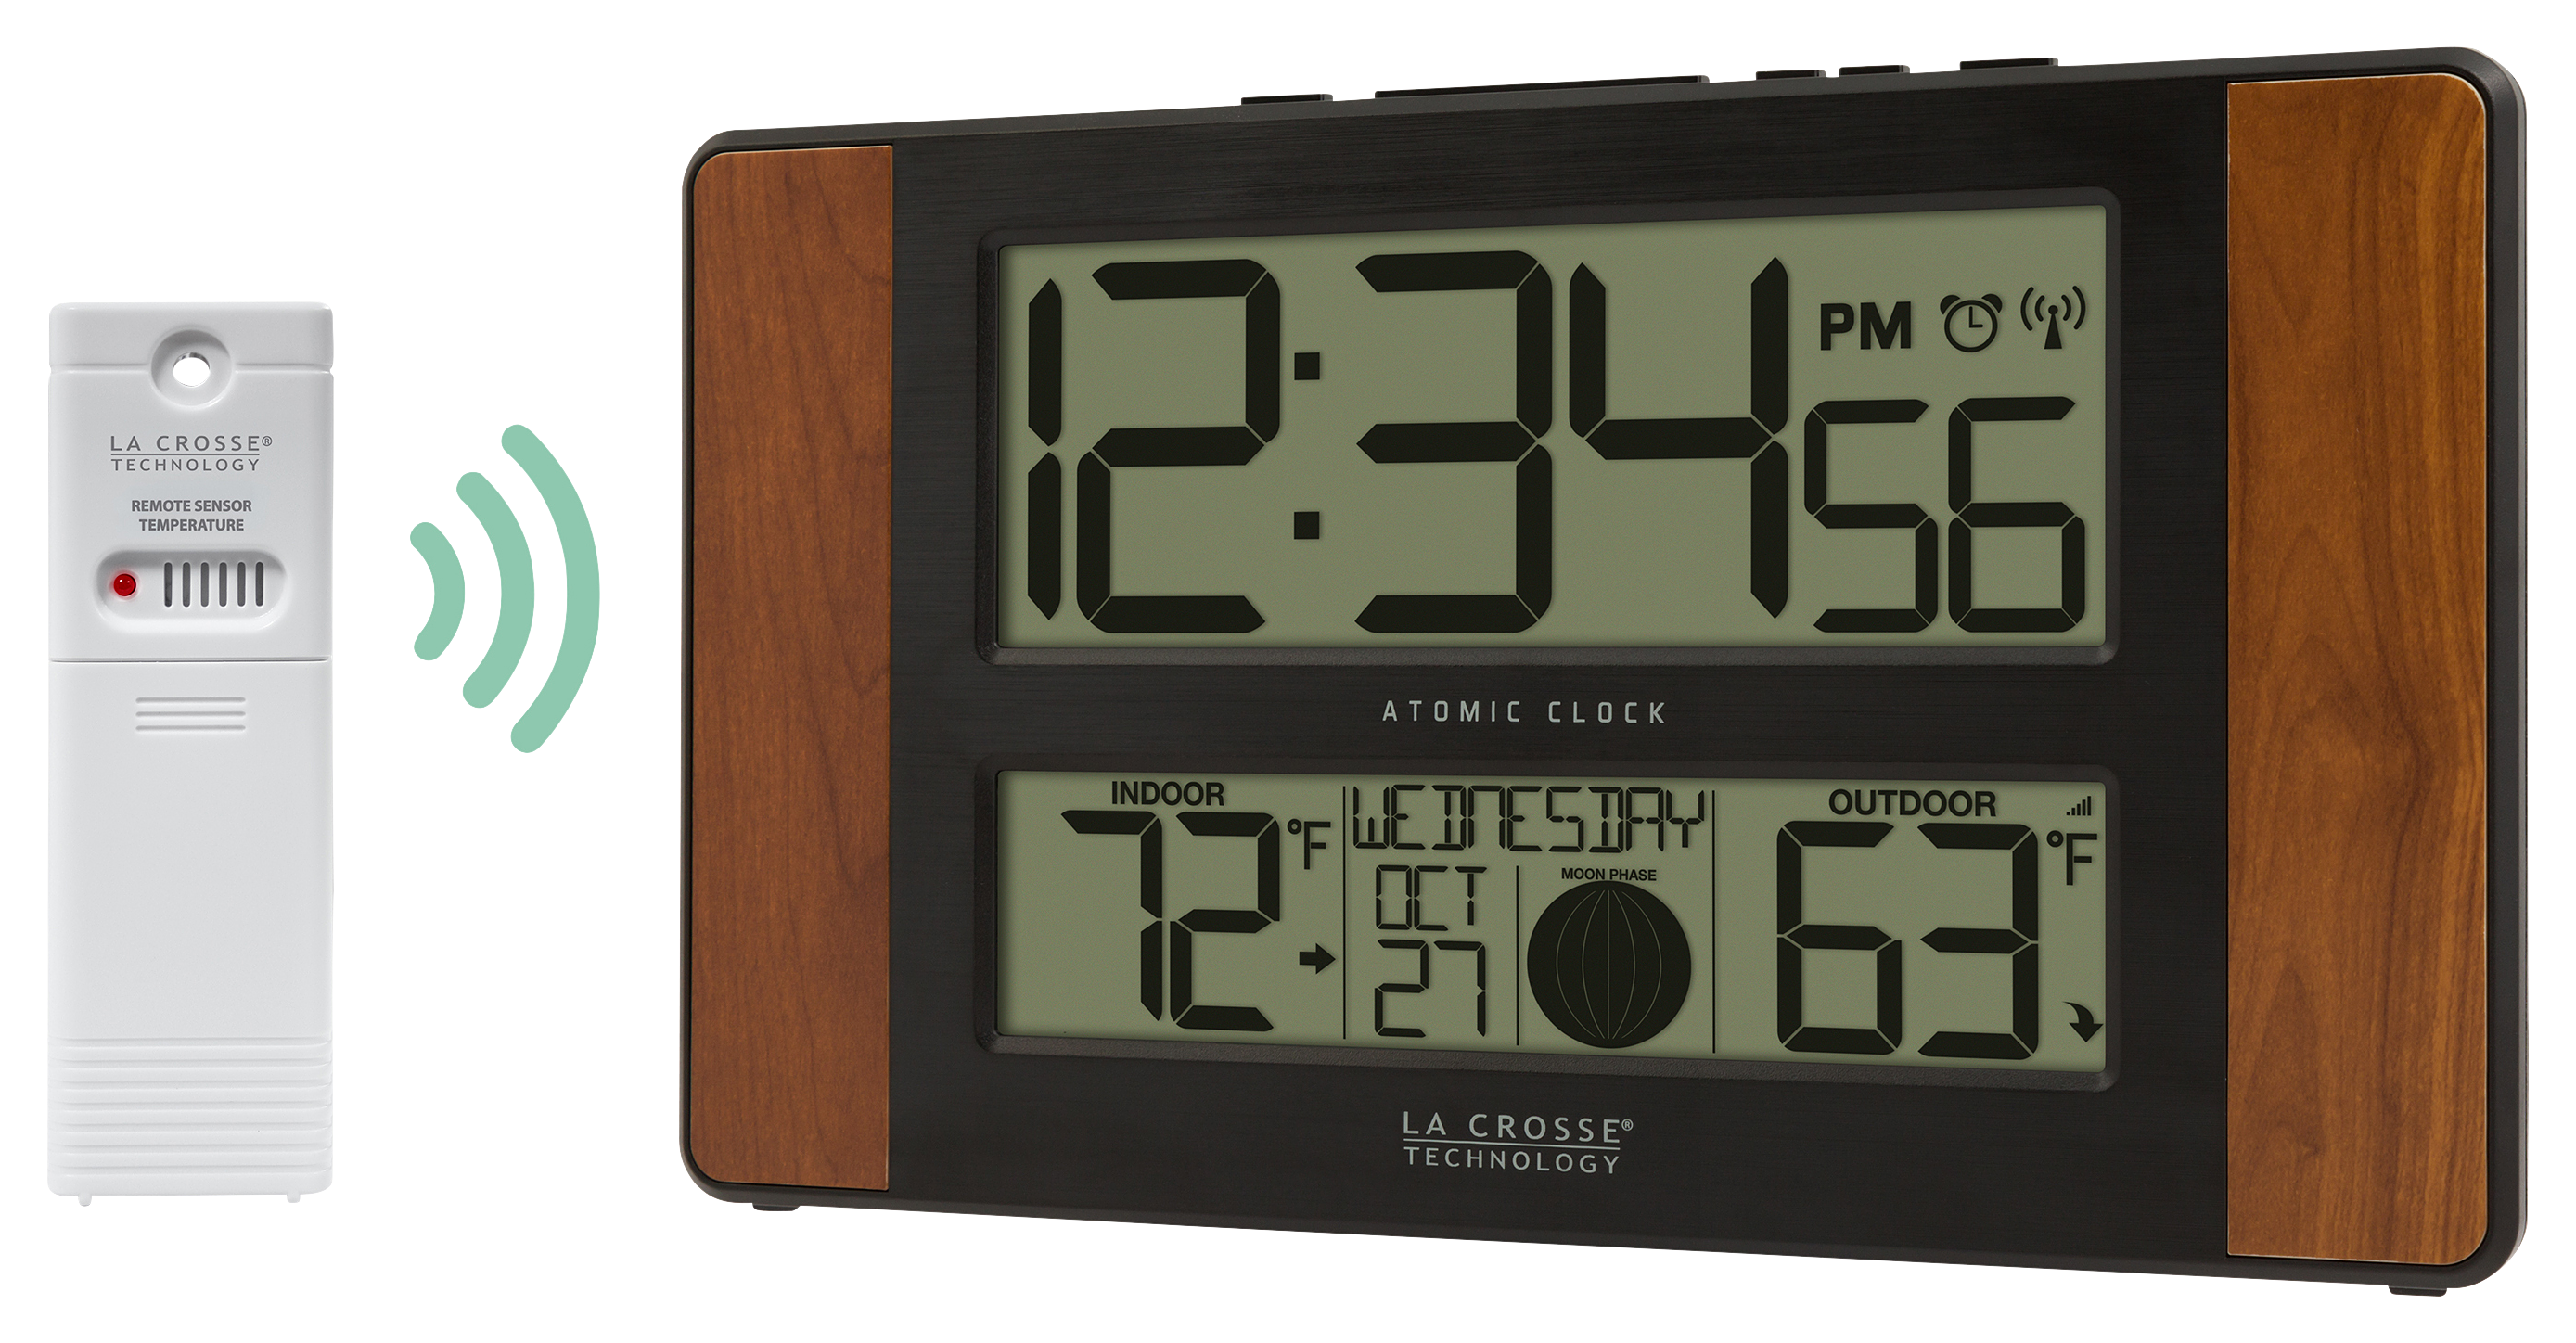 La Crosse Atomic Digital Clock with Temperature and Moon Phase